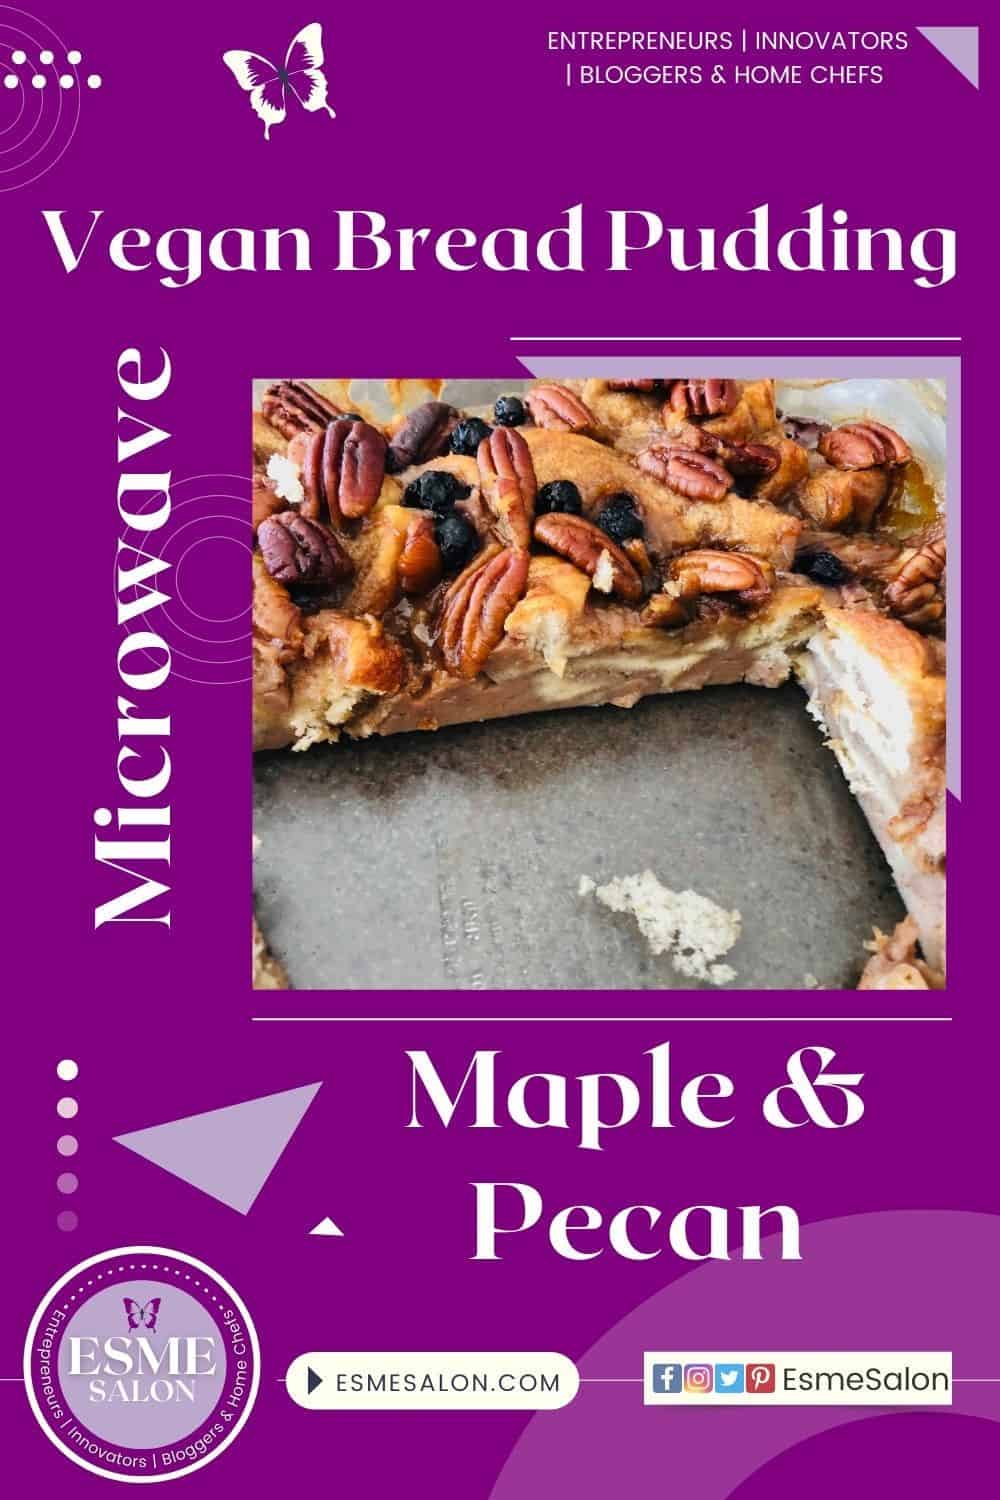 Maple Pecan Vegan Bread, with lots of pecan nuts and fresh blueberries served with coconut cream